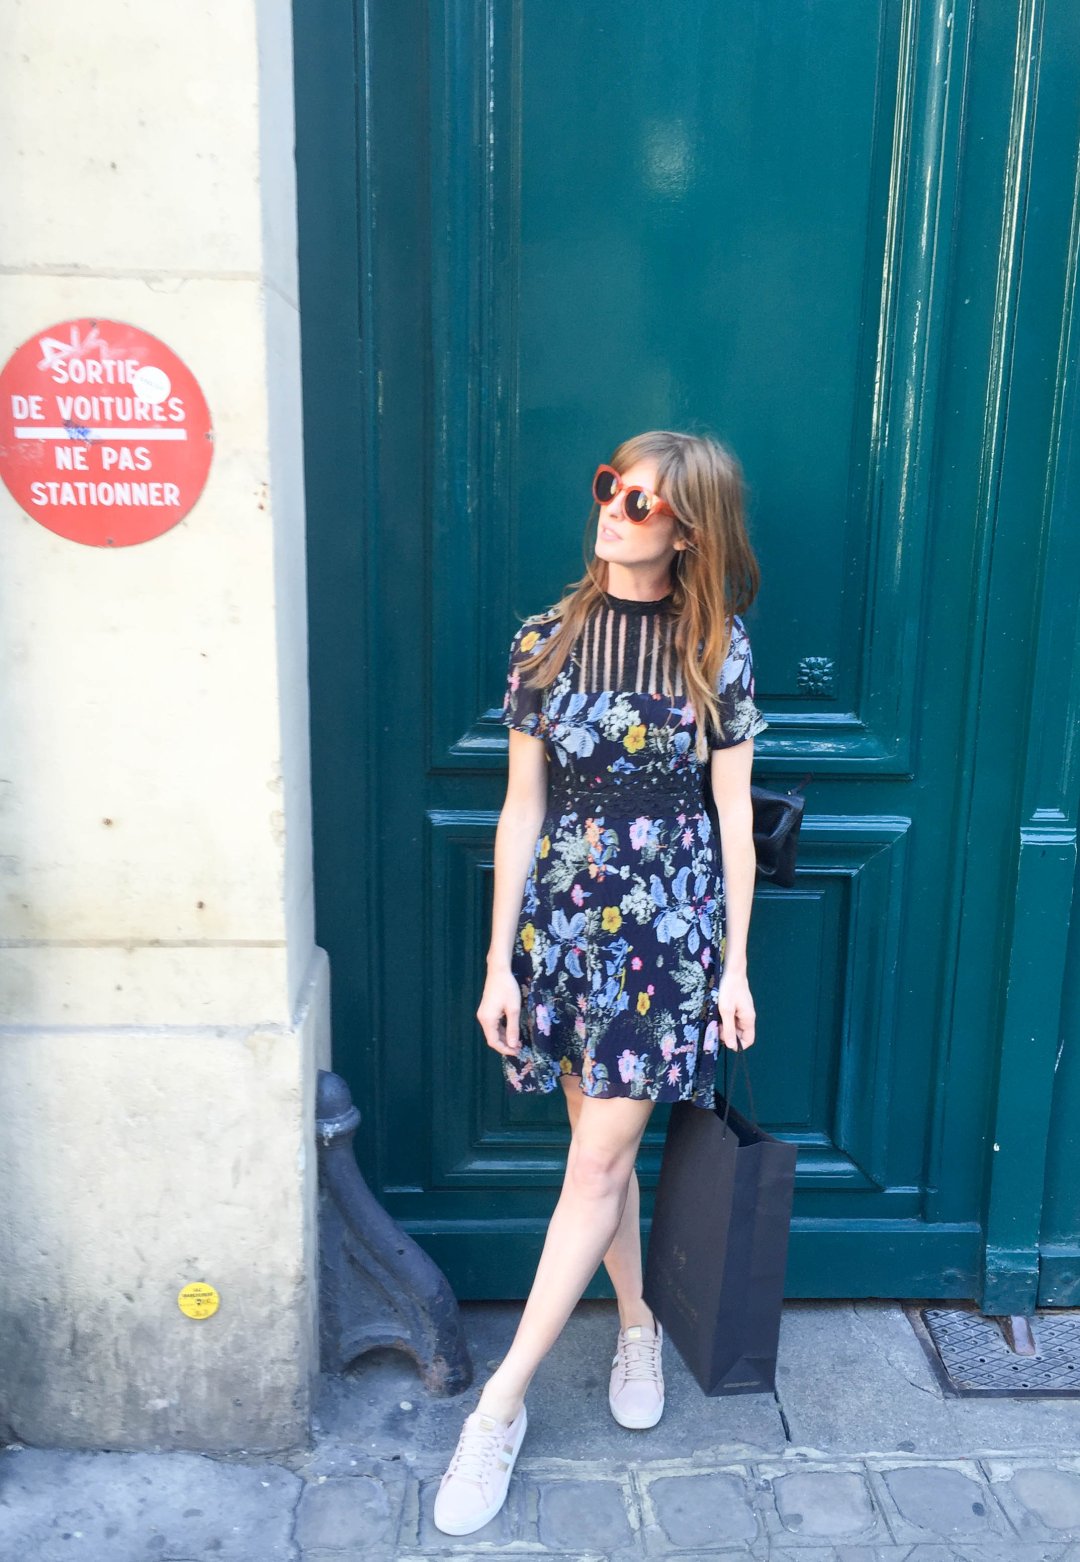 Personal Styling: The Paris Carry-On - Anthropologie Blog